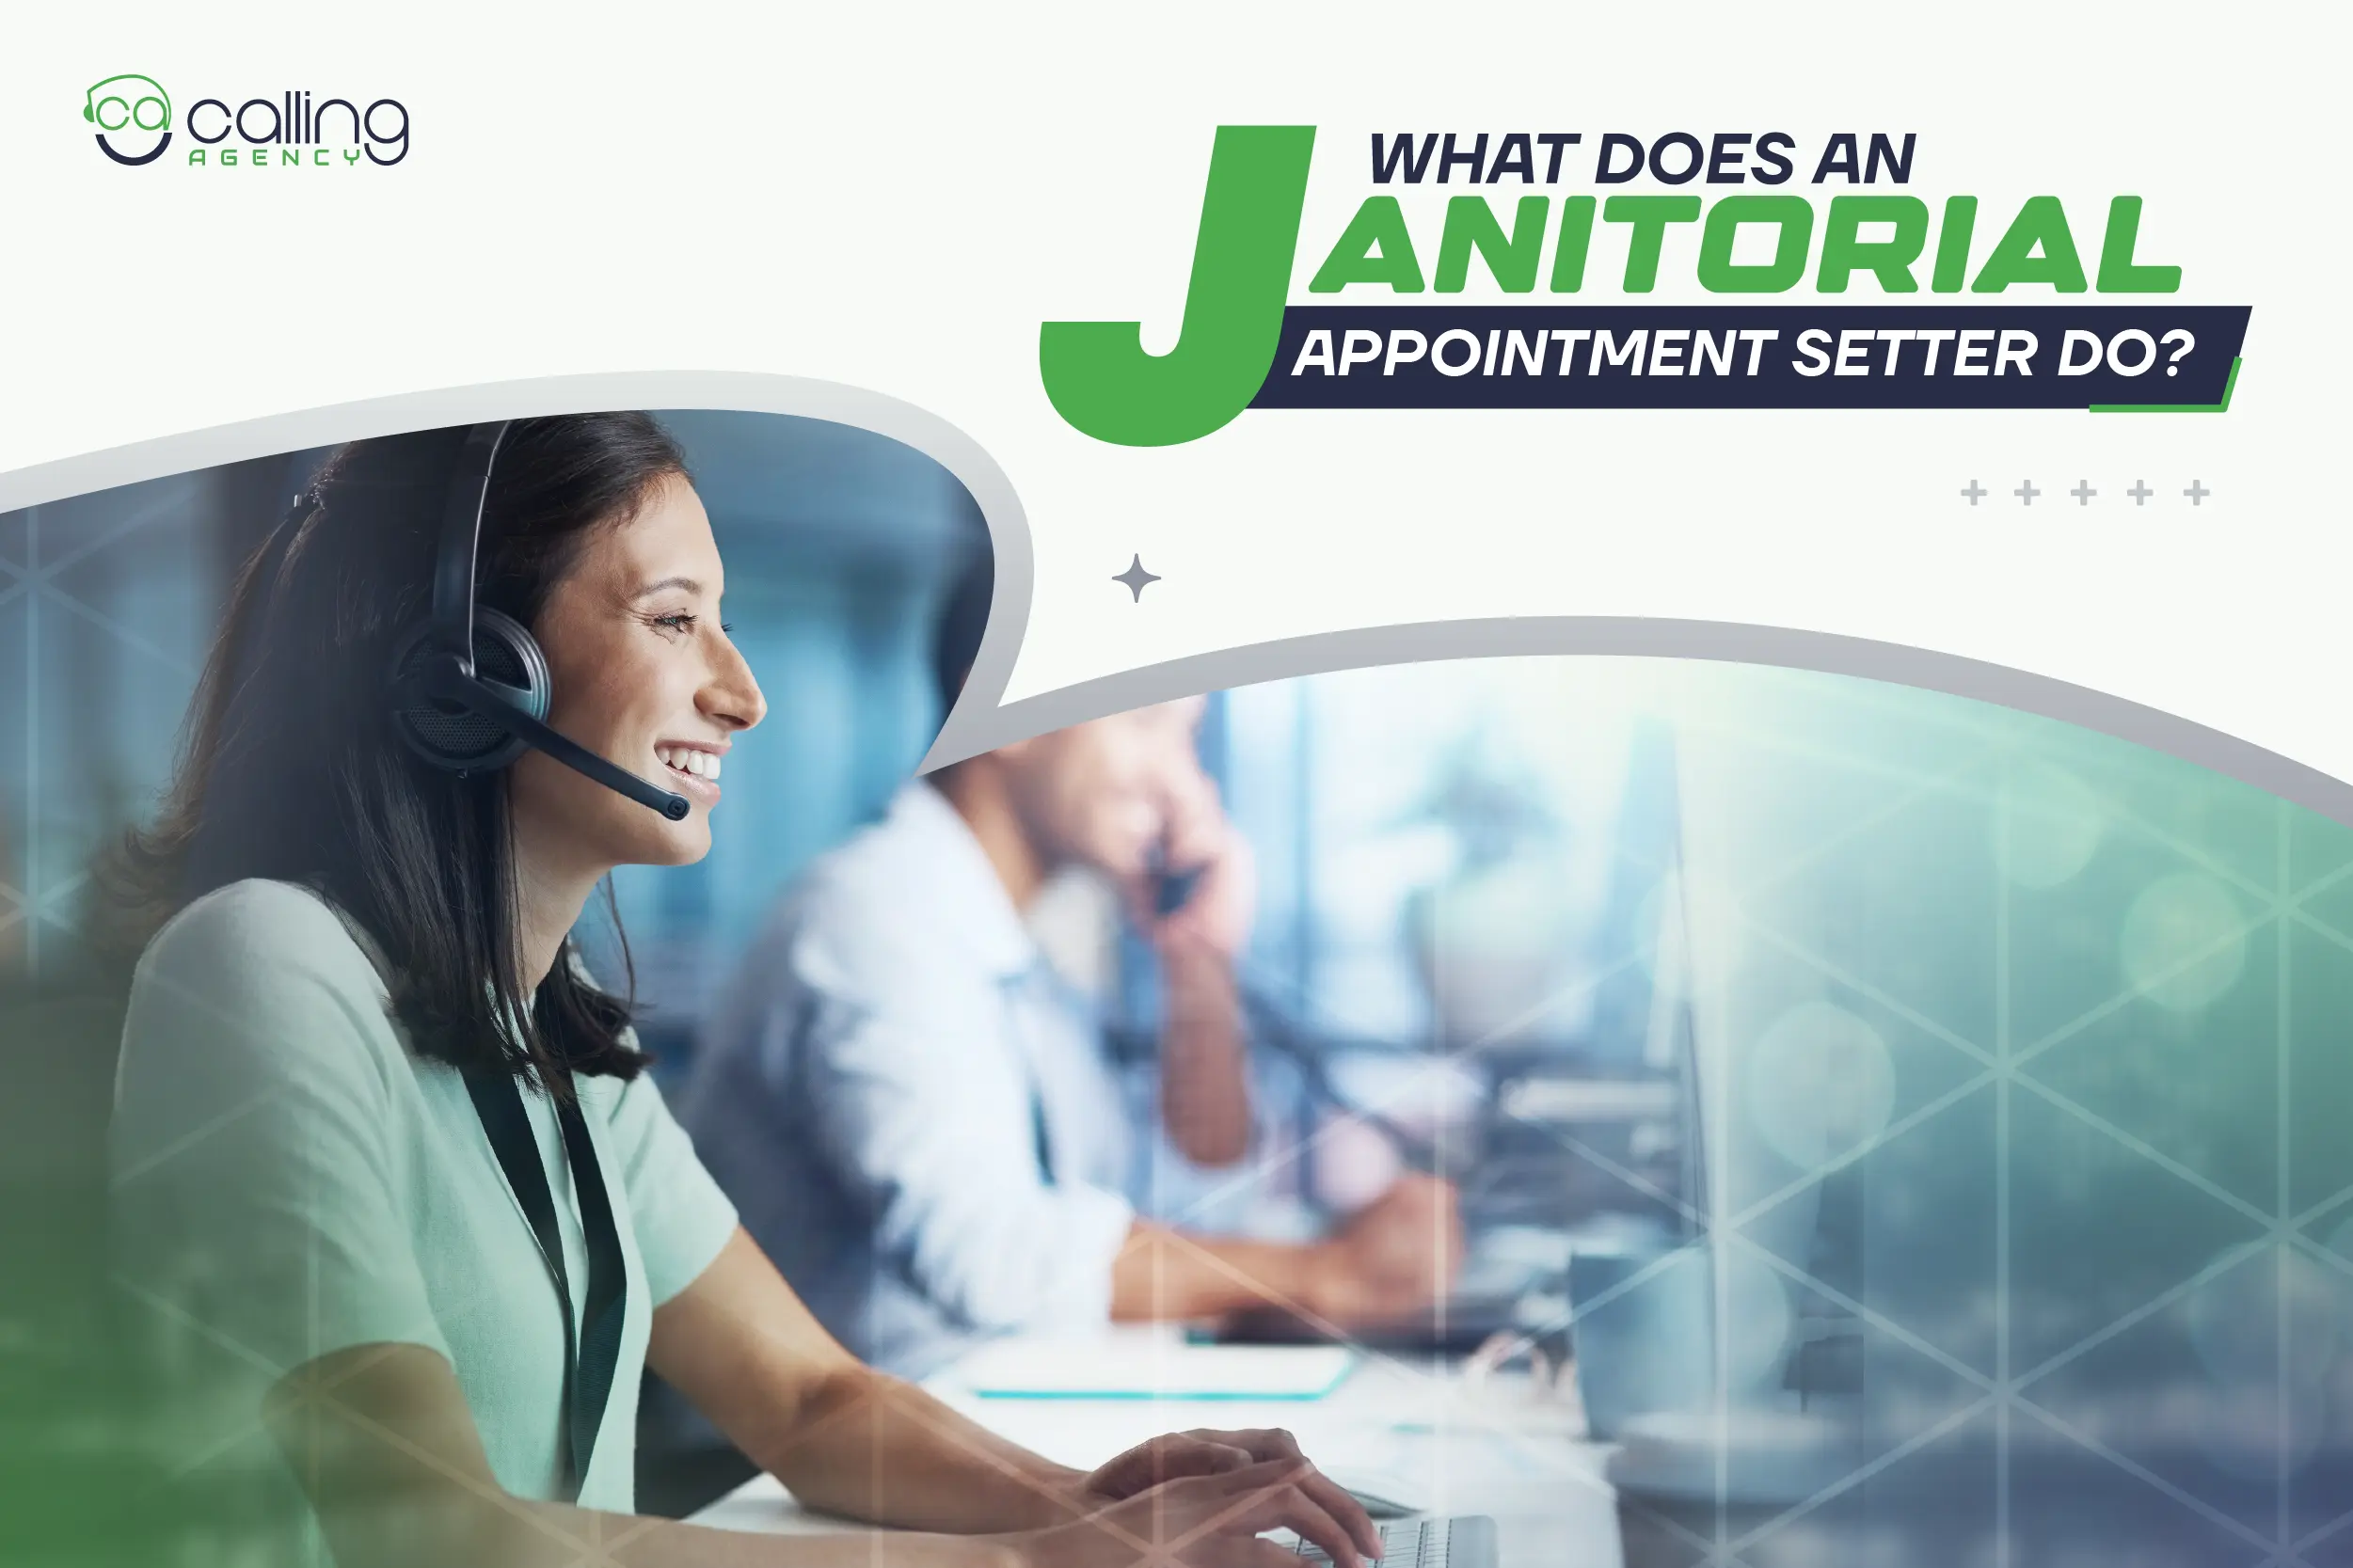 What Does a Janitorial Appointment Setter Do?